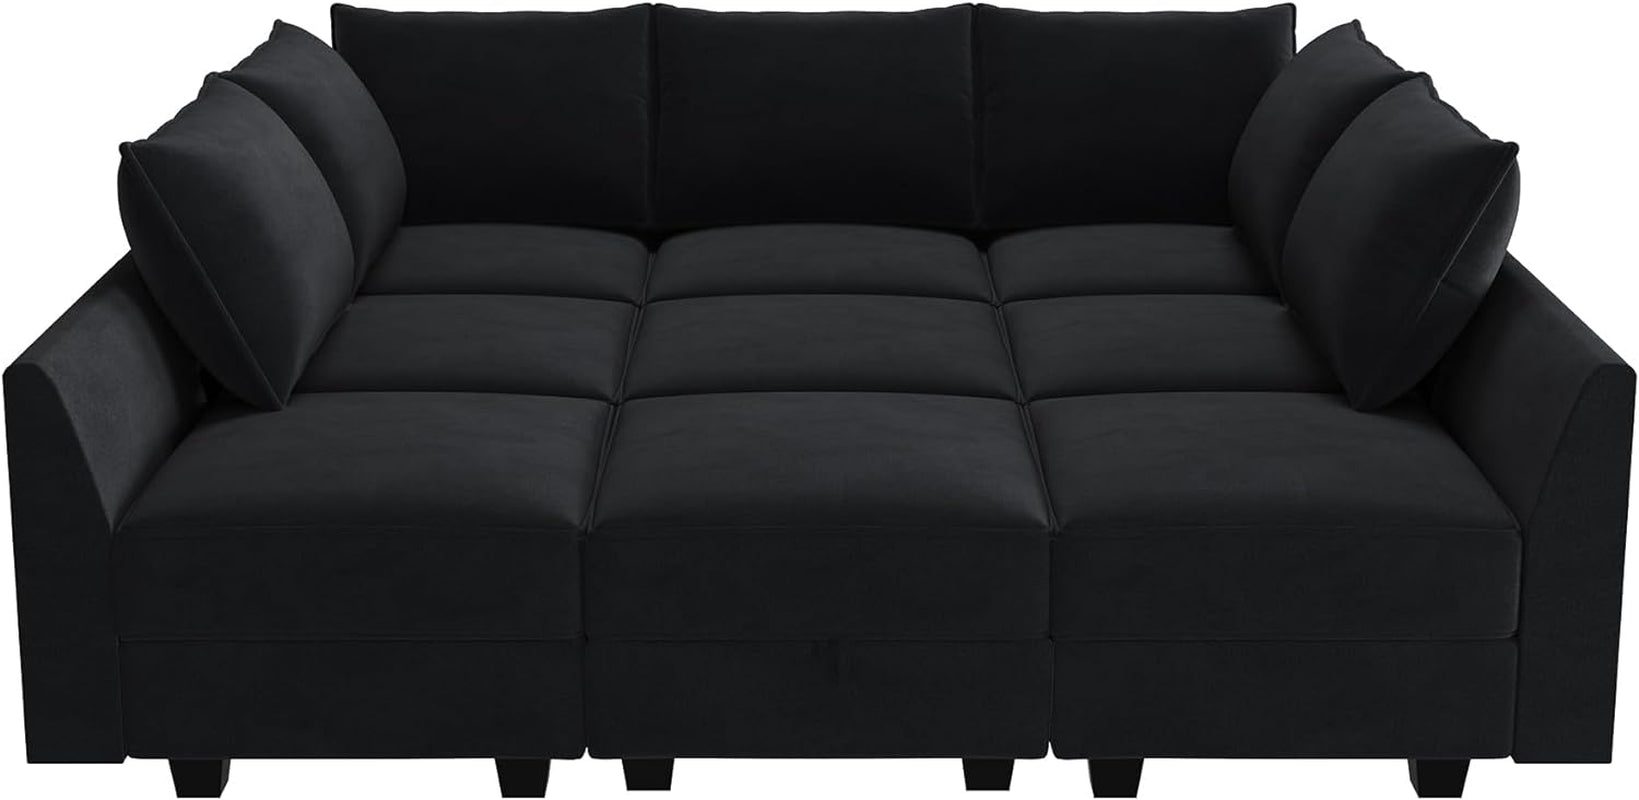 Modular Sectional Sofa with Ottoman Modular Sleeper Sectional Couches for Living Room, Black